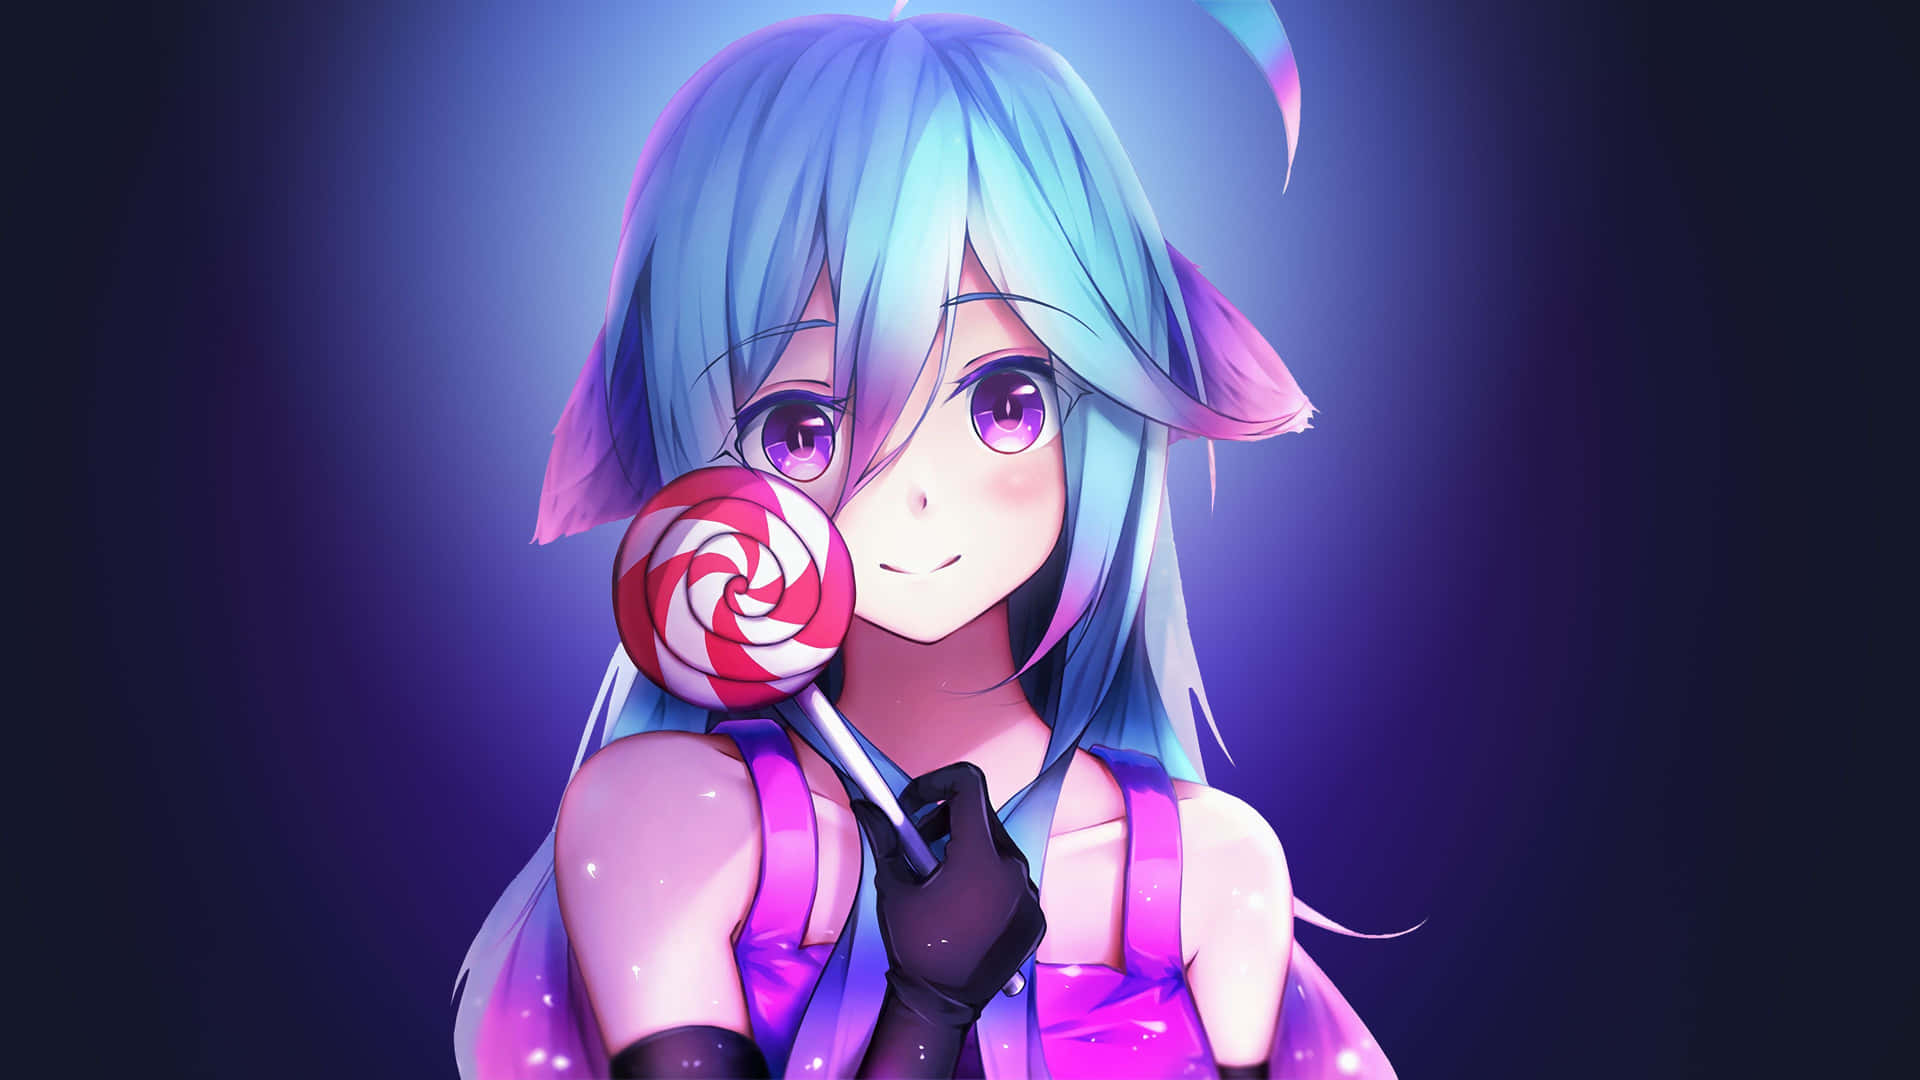 A Girl With Blue Hair And Purple Eyes Holding A Lollipop Wallpaper